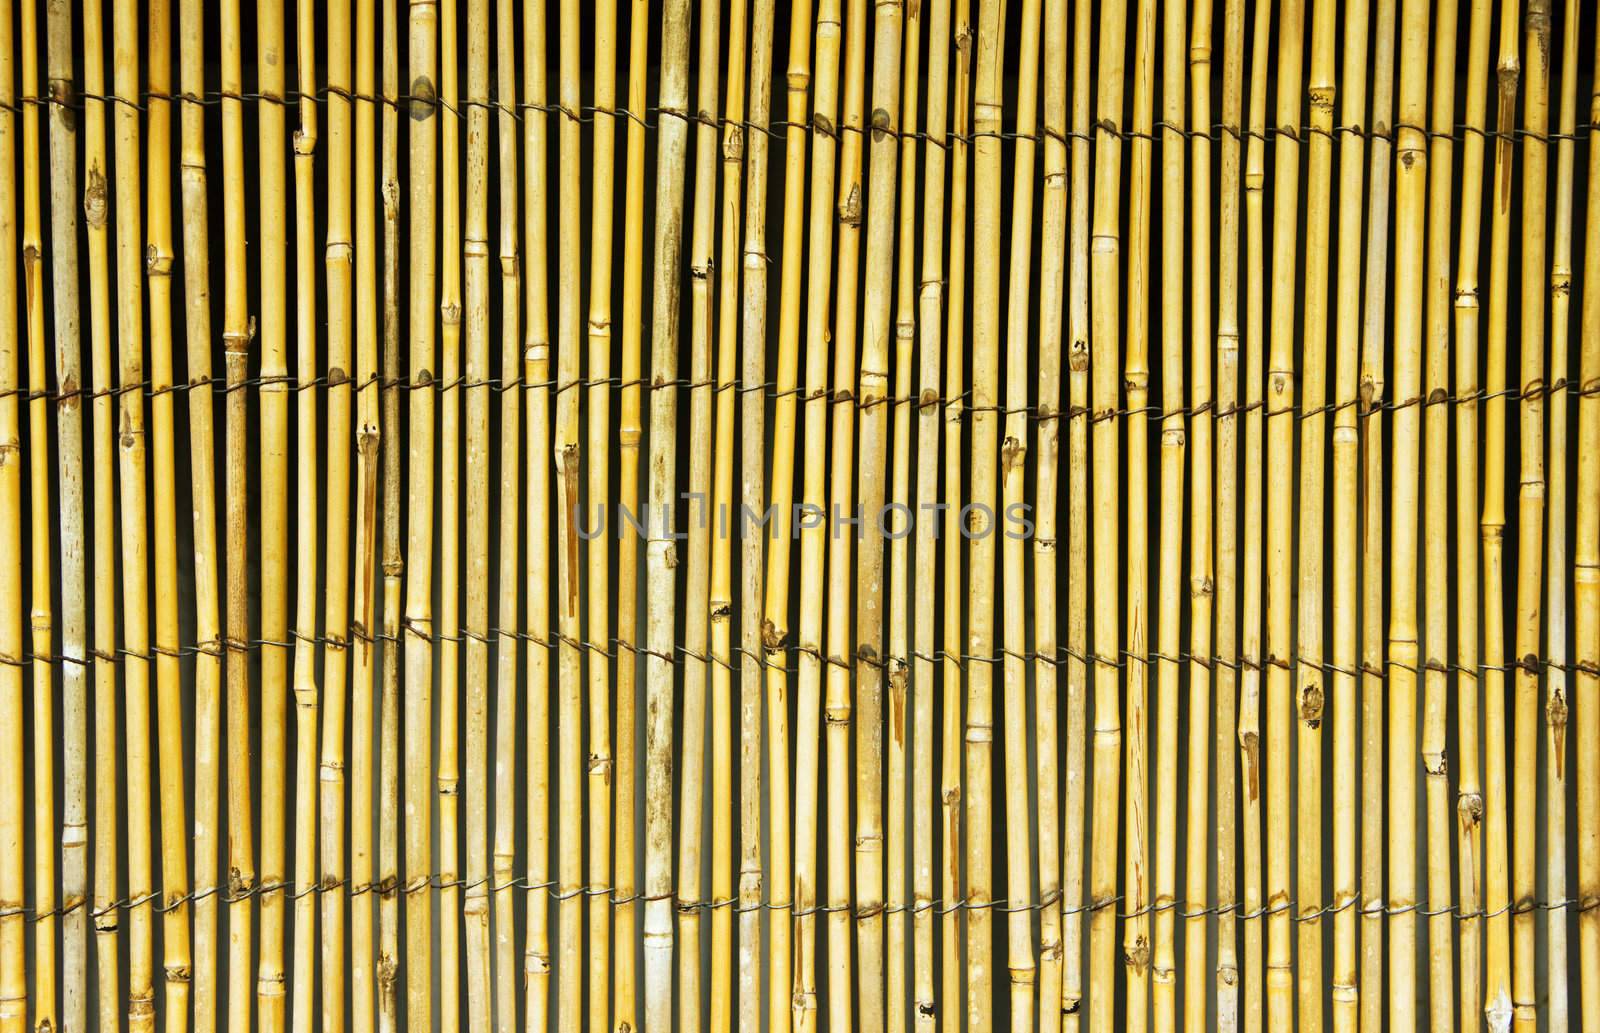 A bamboo fence background